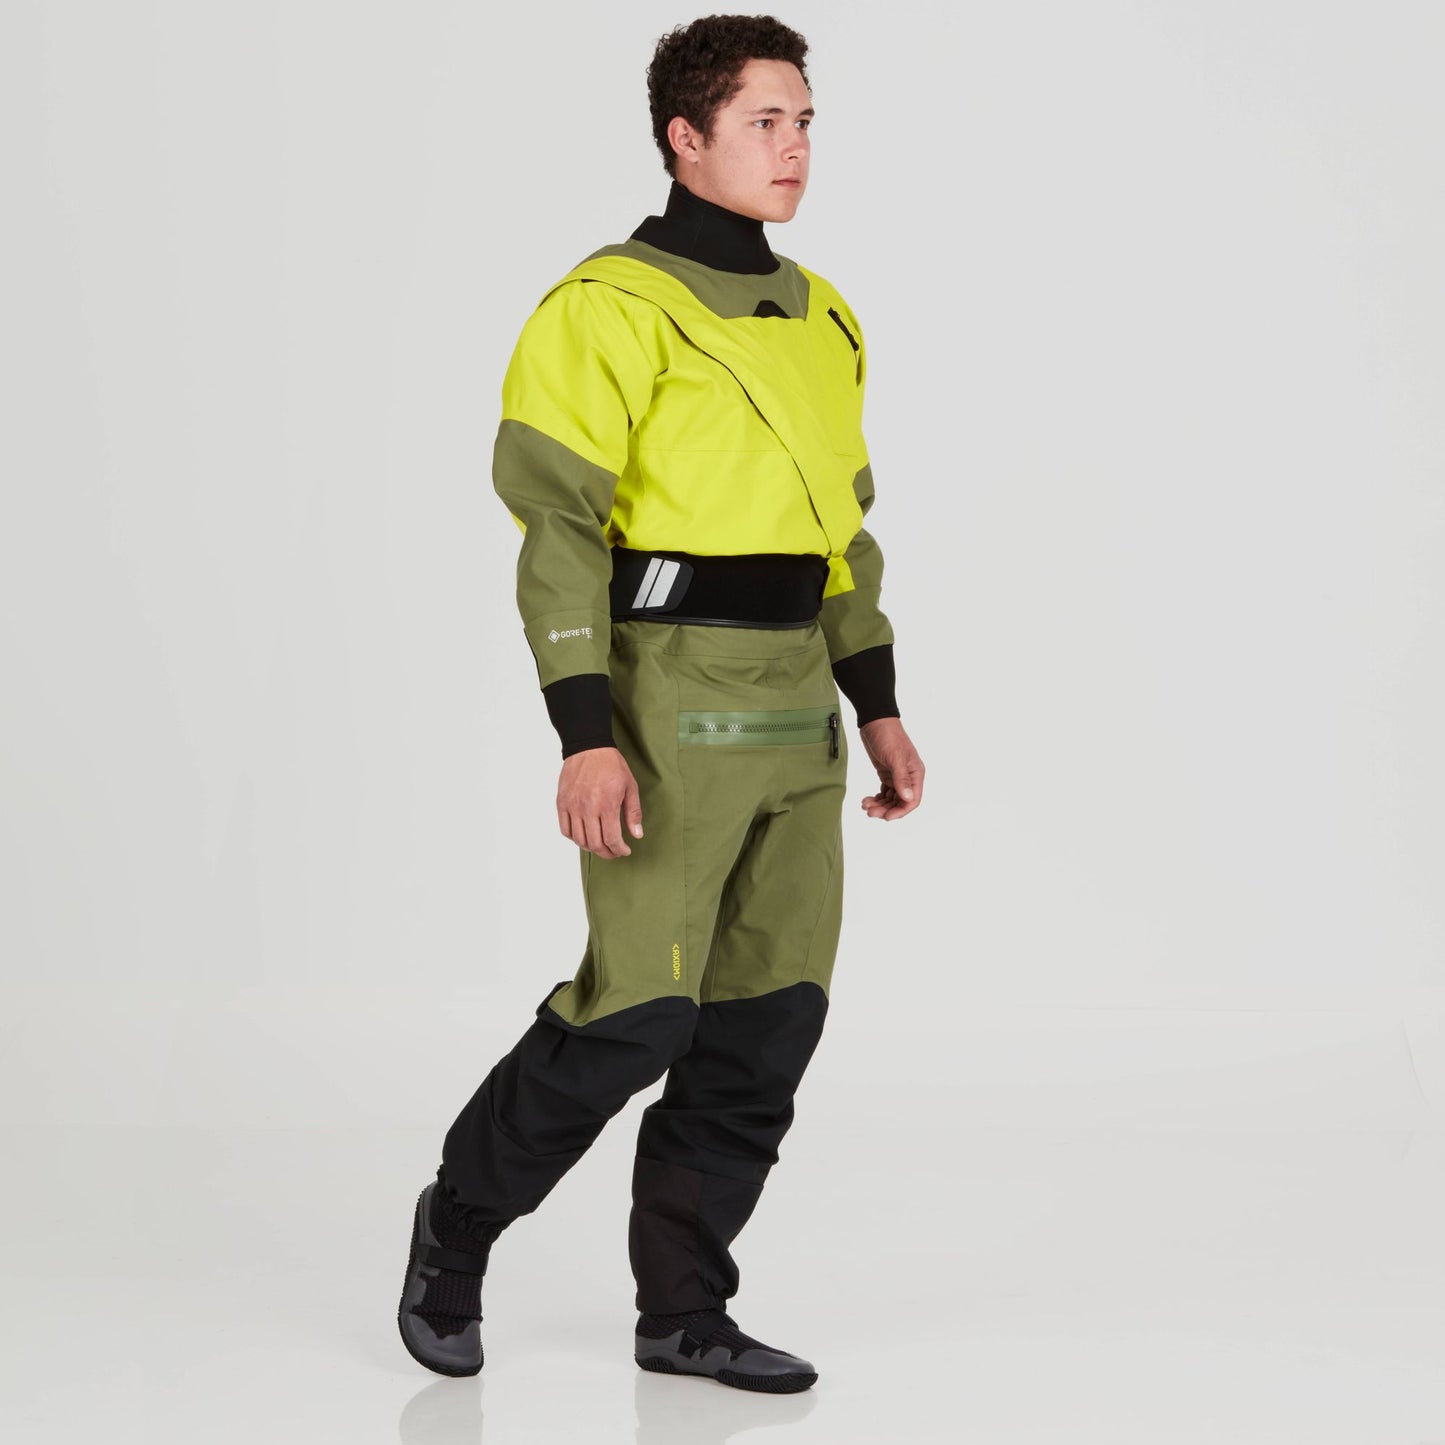 Men's Axiom GORE-TEX Pro - NRS Dry Suit (Chartreuse)